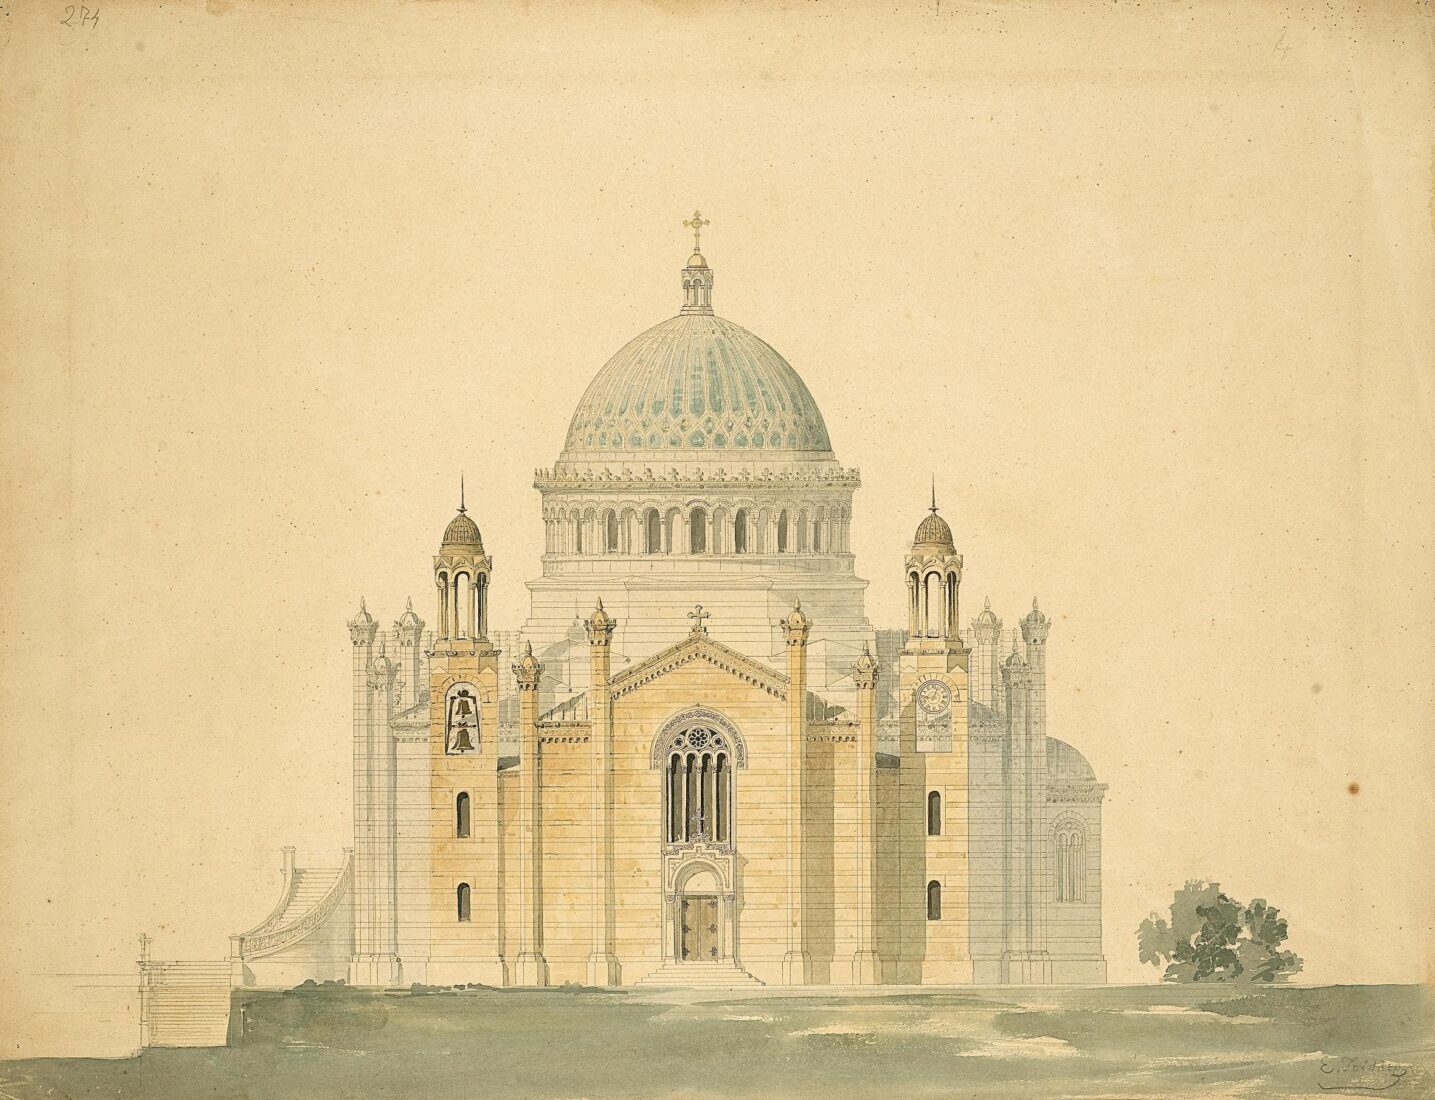 Unknown Church, Probably the Transfiguration Church or St. Saviour, Villia, Side View - Ziller Ernst